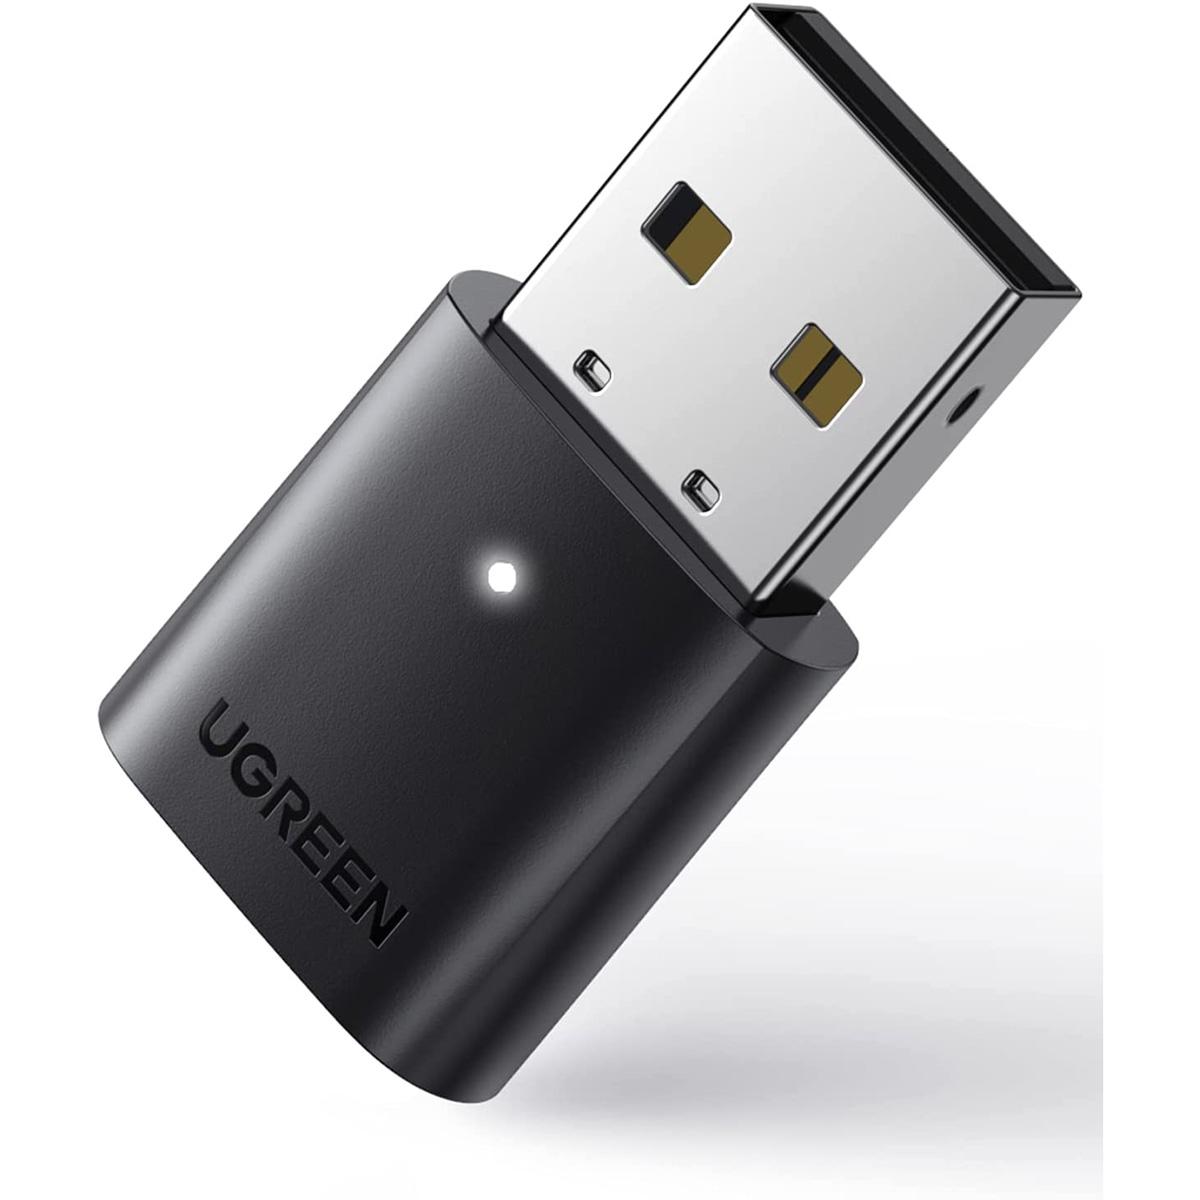 UGreen USB 2.0 Bluetooth 5.0 Dongle for $7.79